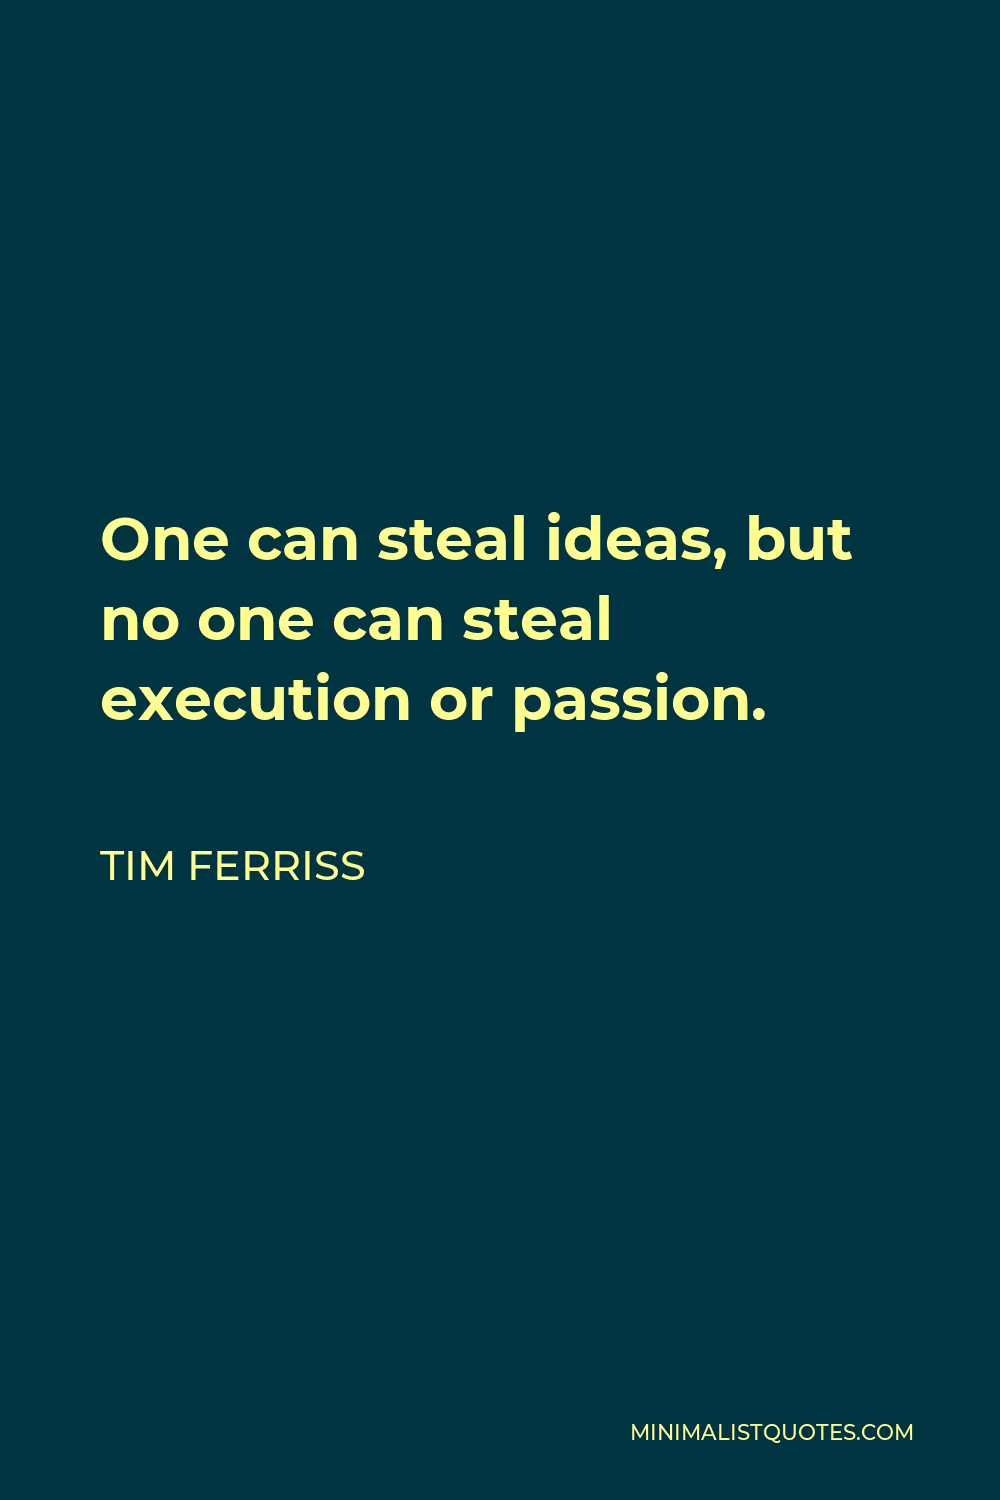 Tim Ferriss Quote - One can steal ideas, but no one can steal execution or passion.